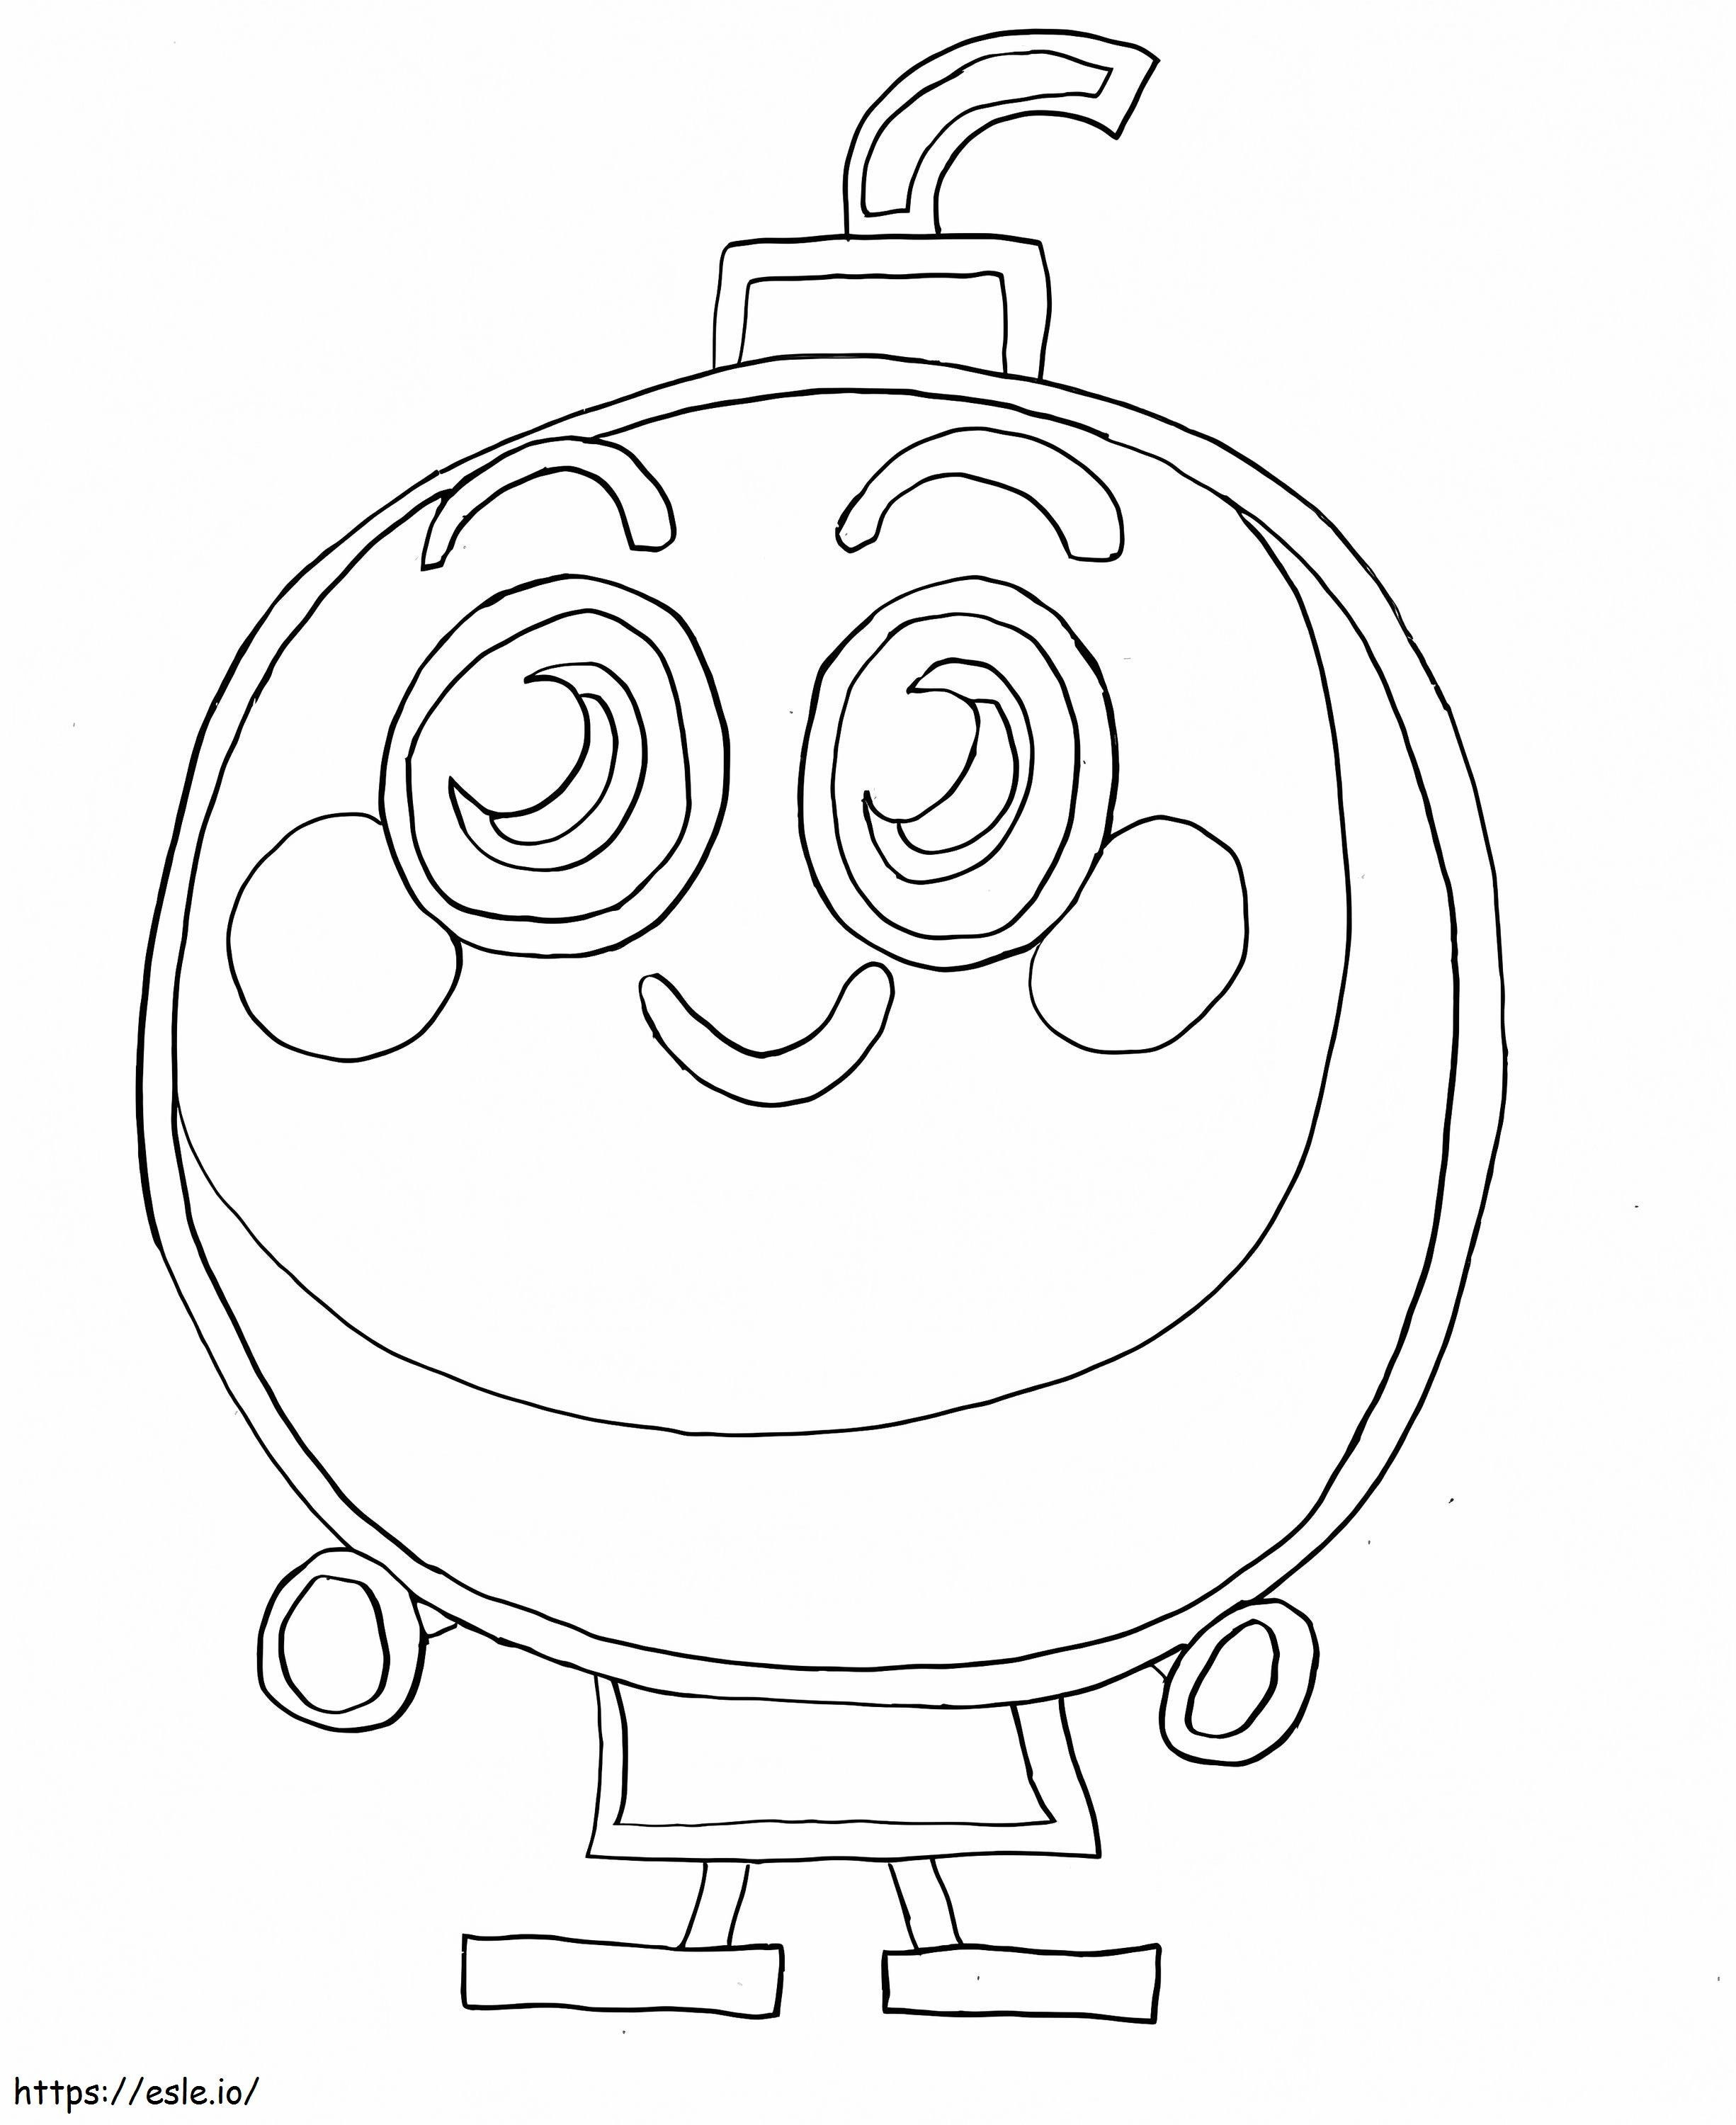 Happy Moshi Monsters coloring page